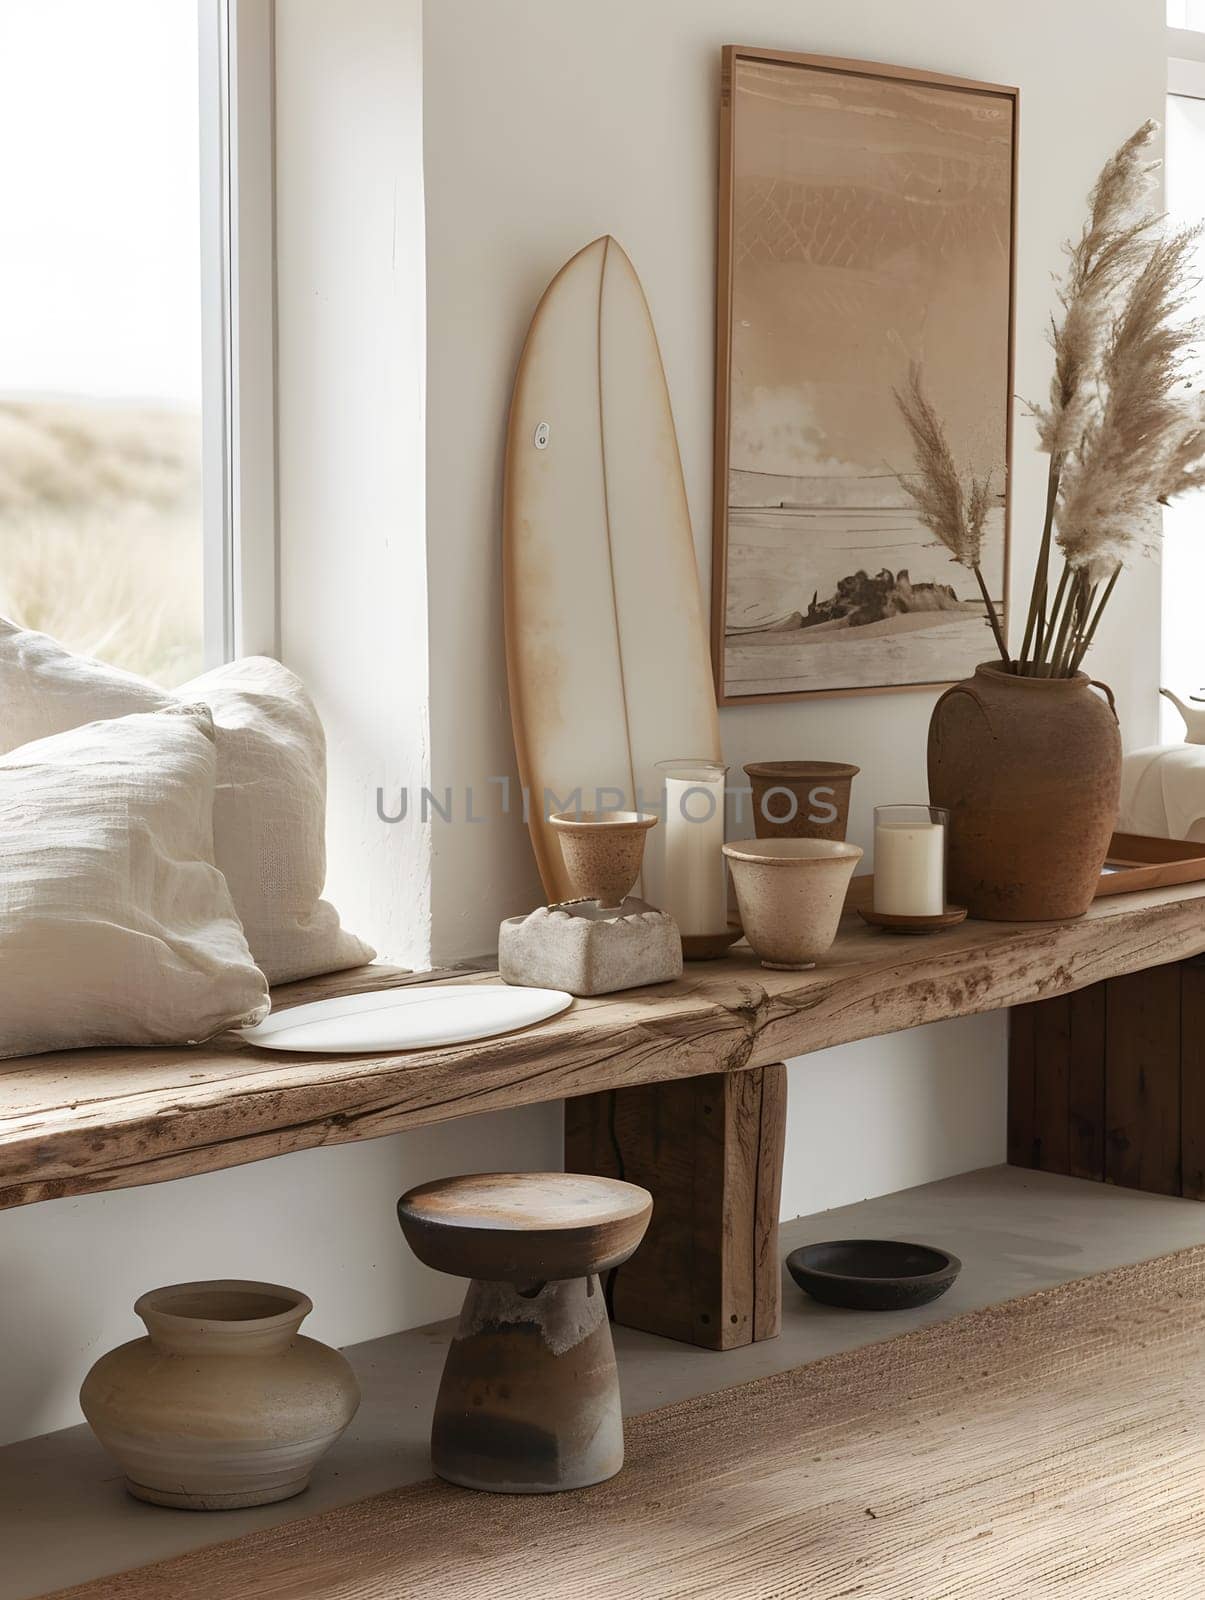 a living room with a wooden bench , vases , candles and a surfboard on the wall by Nadtochiy